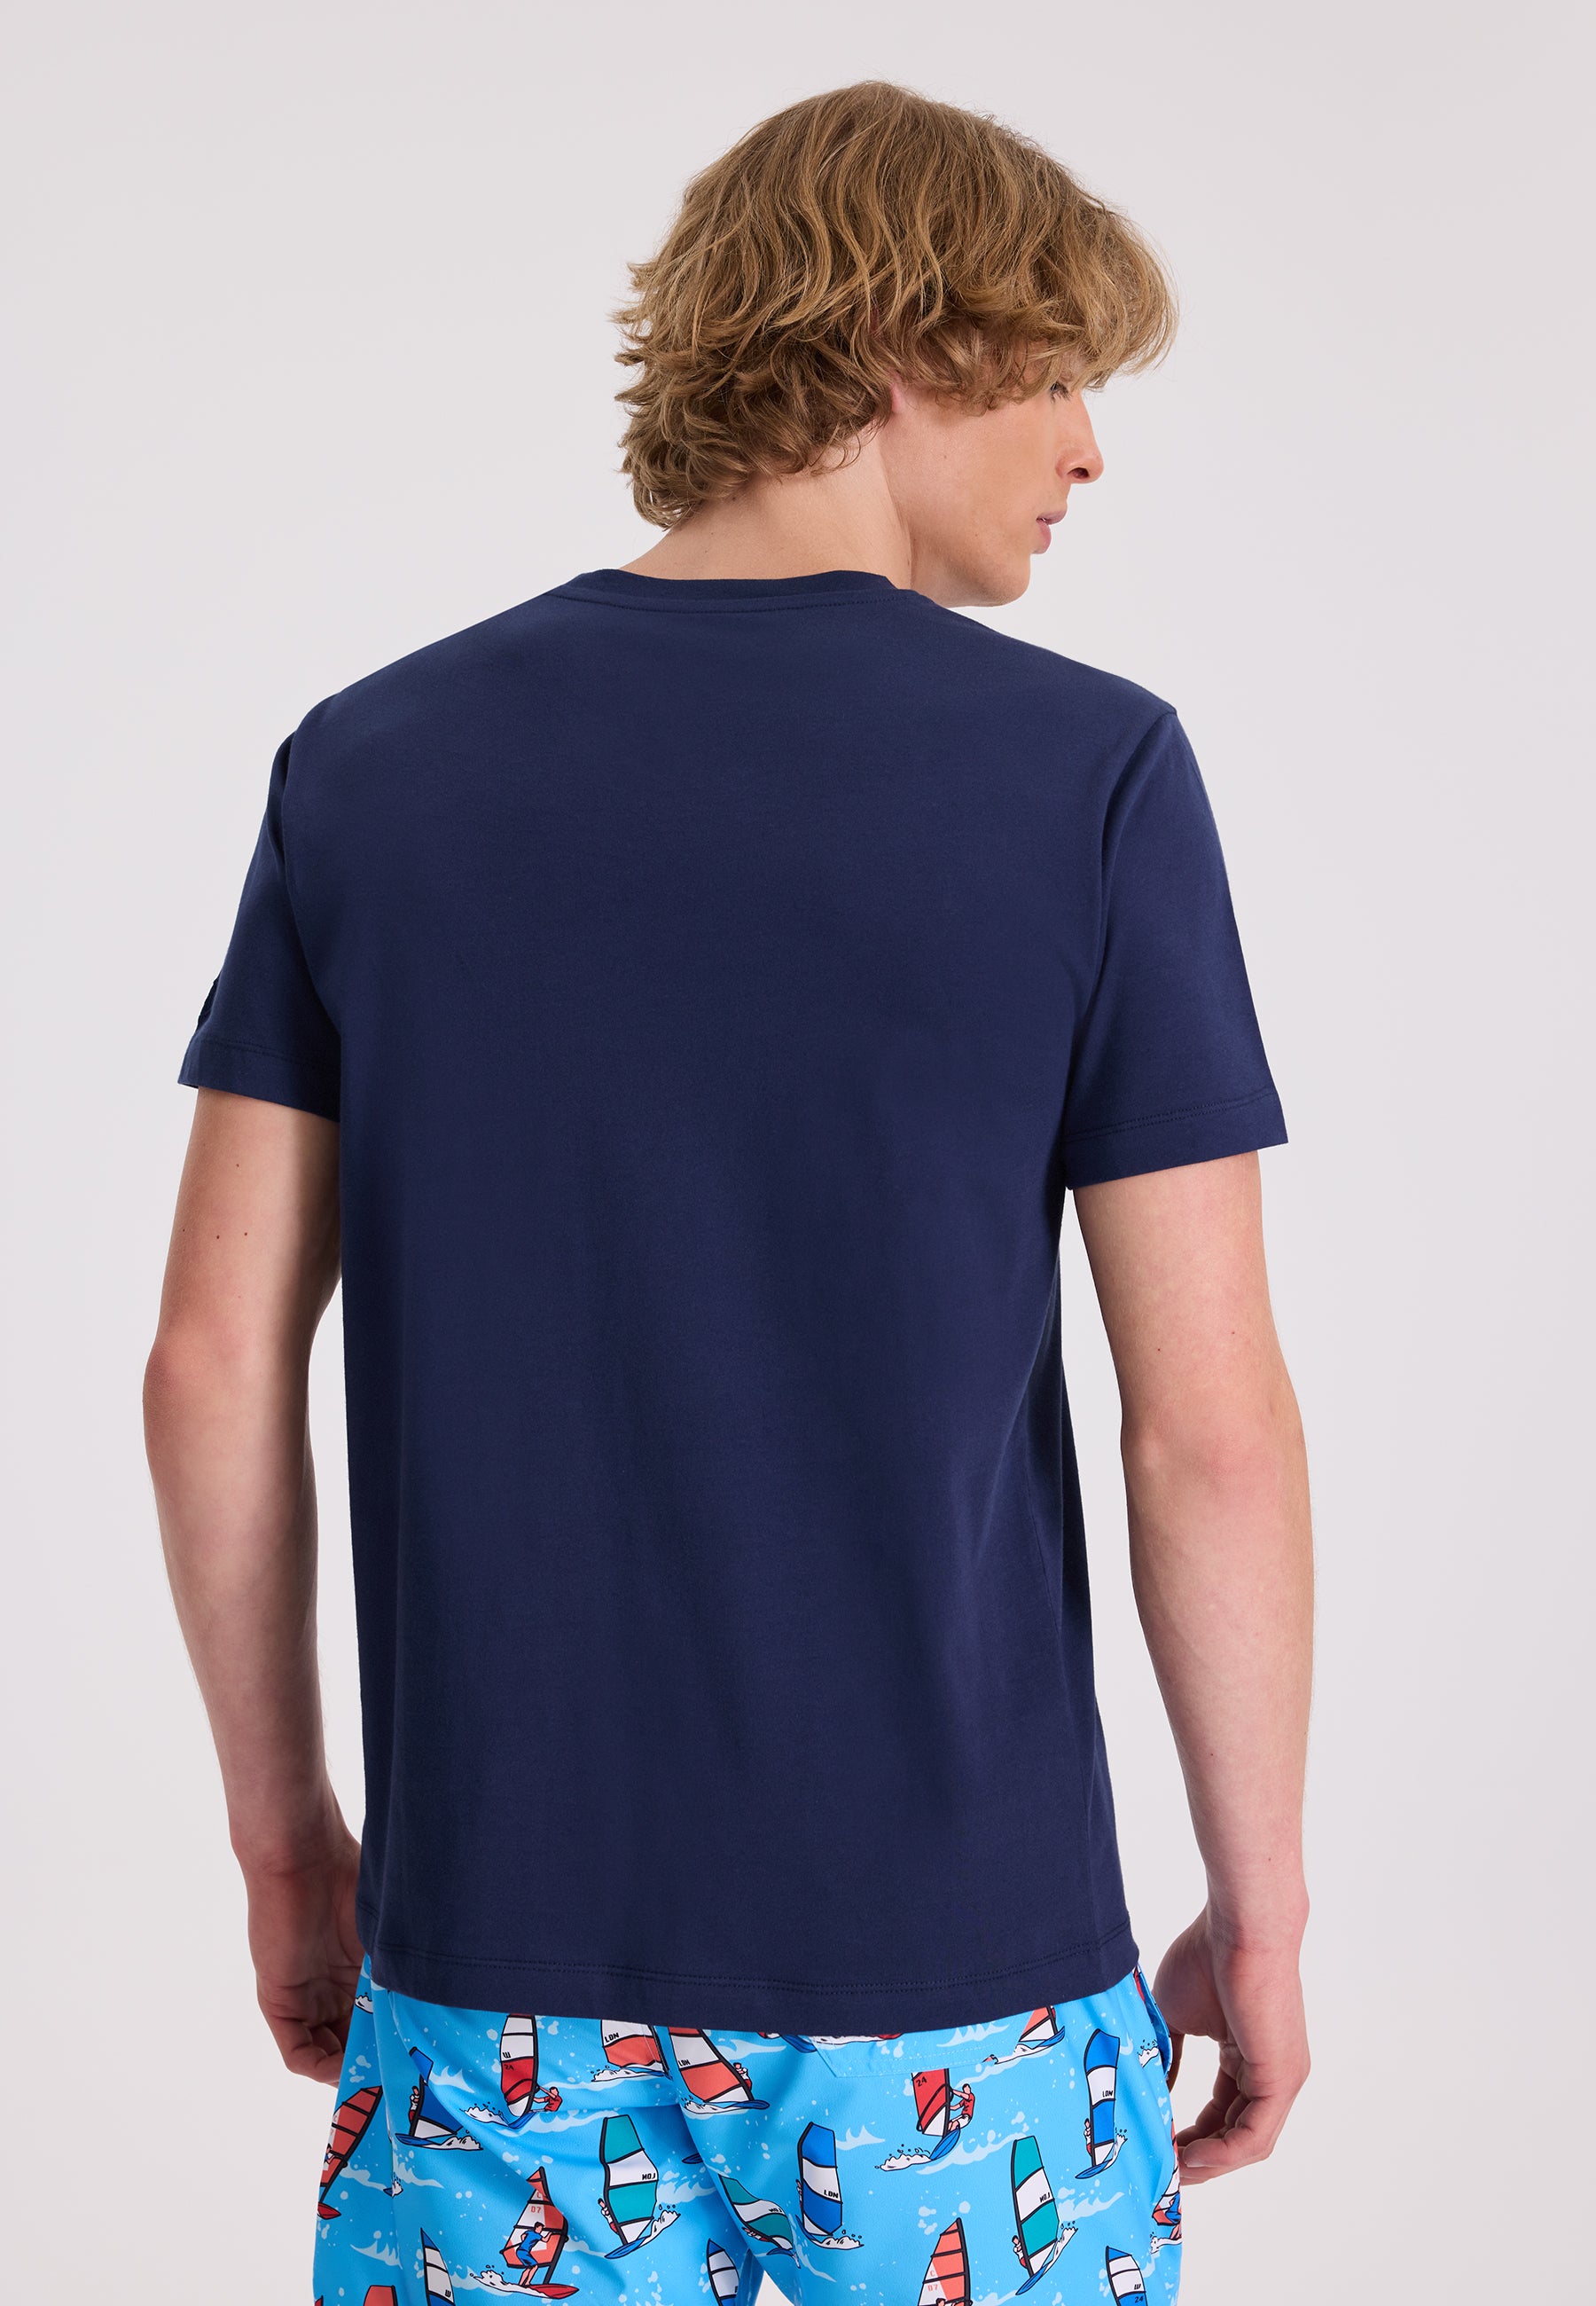 WMEMBROIDERY SURFER TEE in Naval Academy